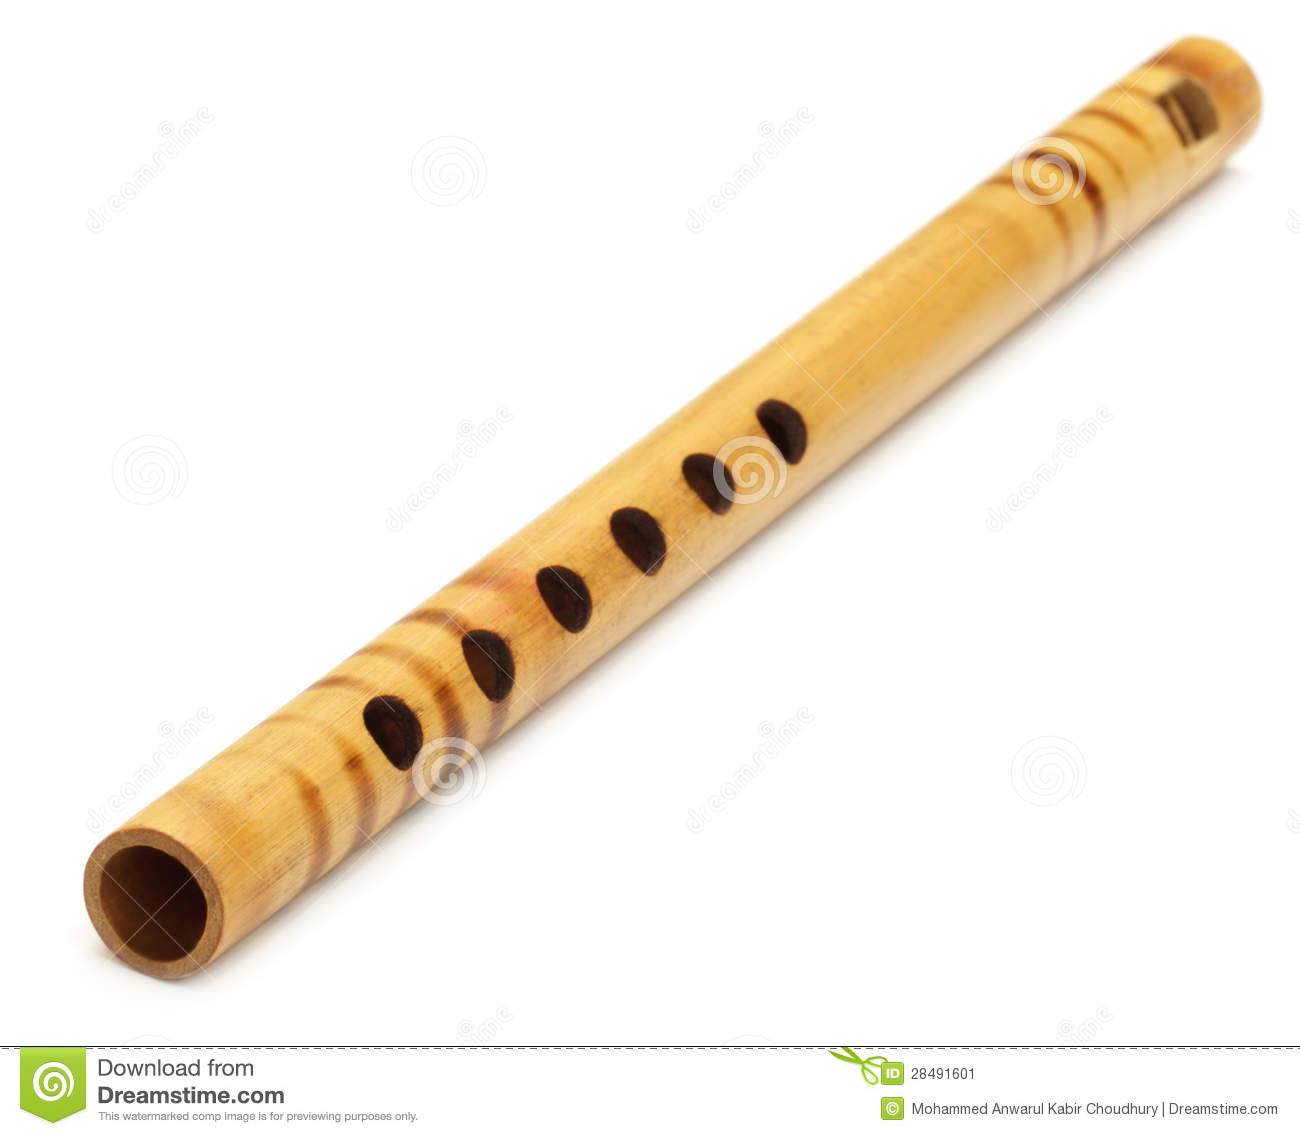 Bamboo Flute Stock Photos, Images, & Pictures.